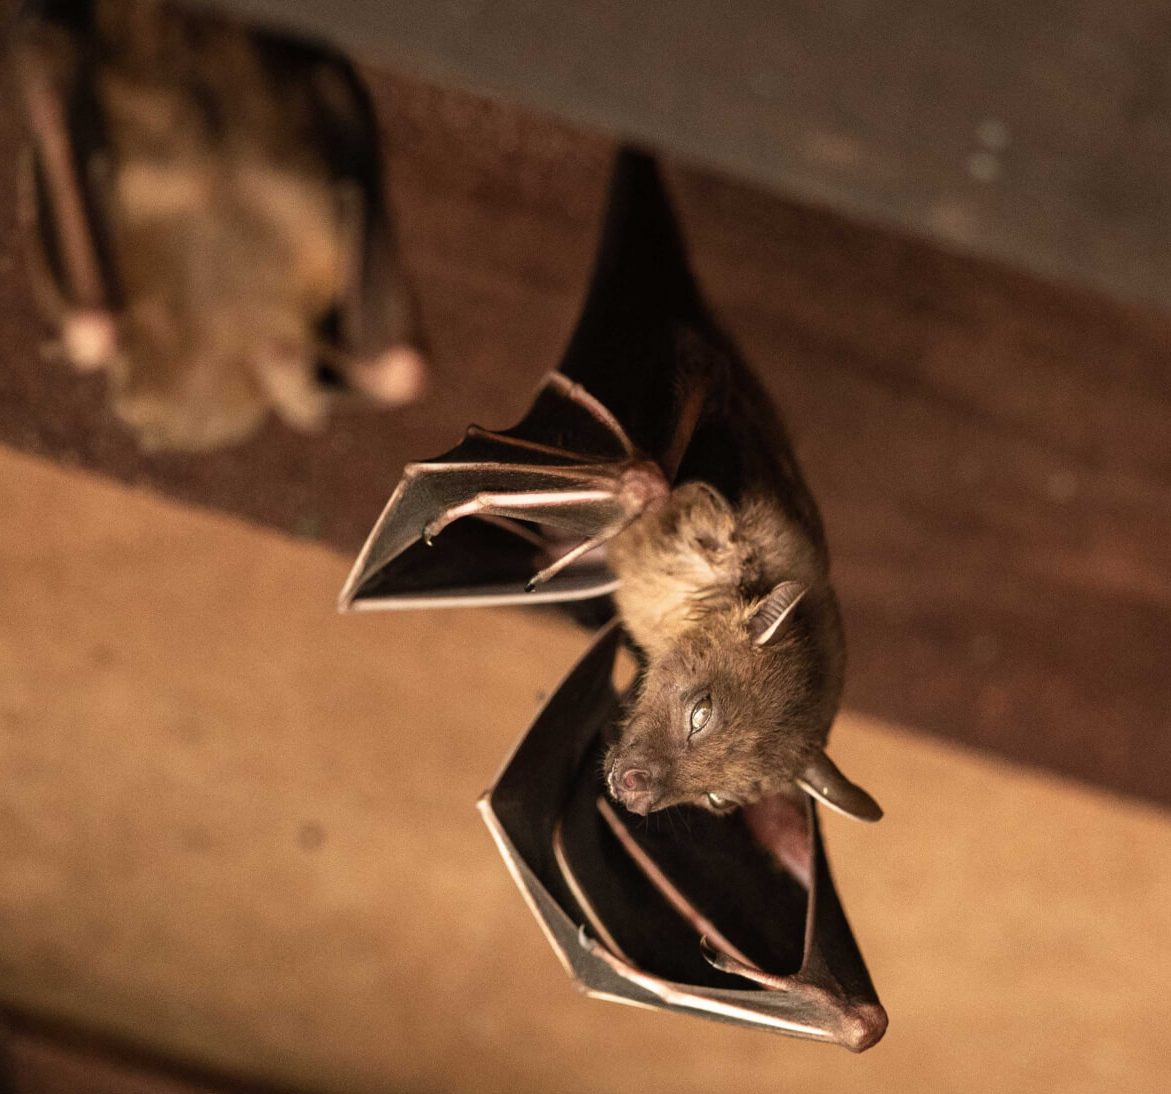 Expert bat removal services for a safe and humane solution in St. Augustine